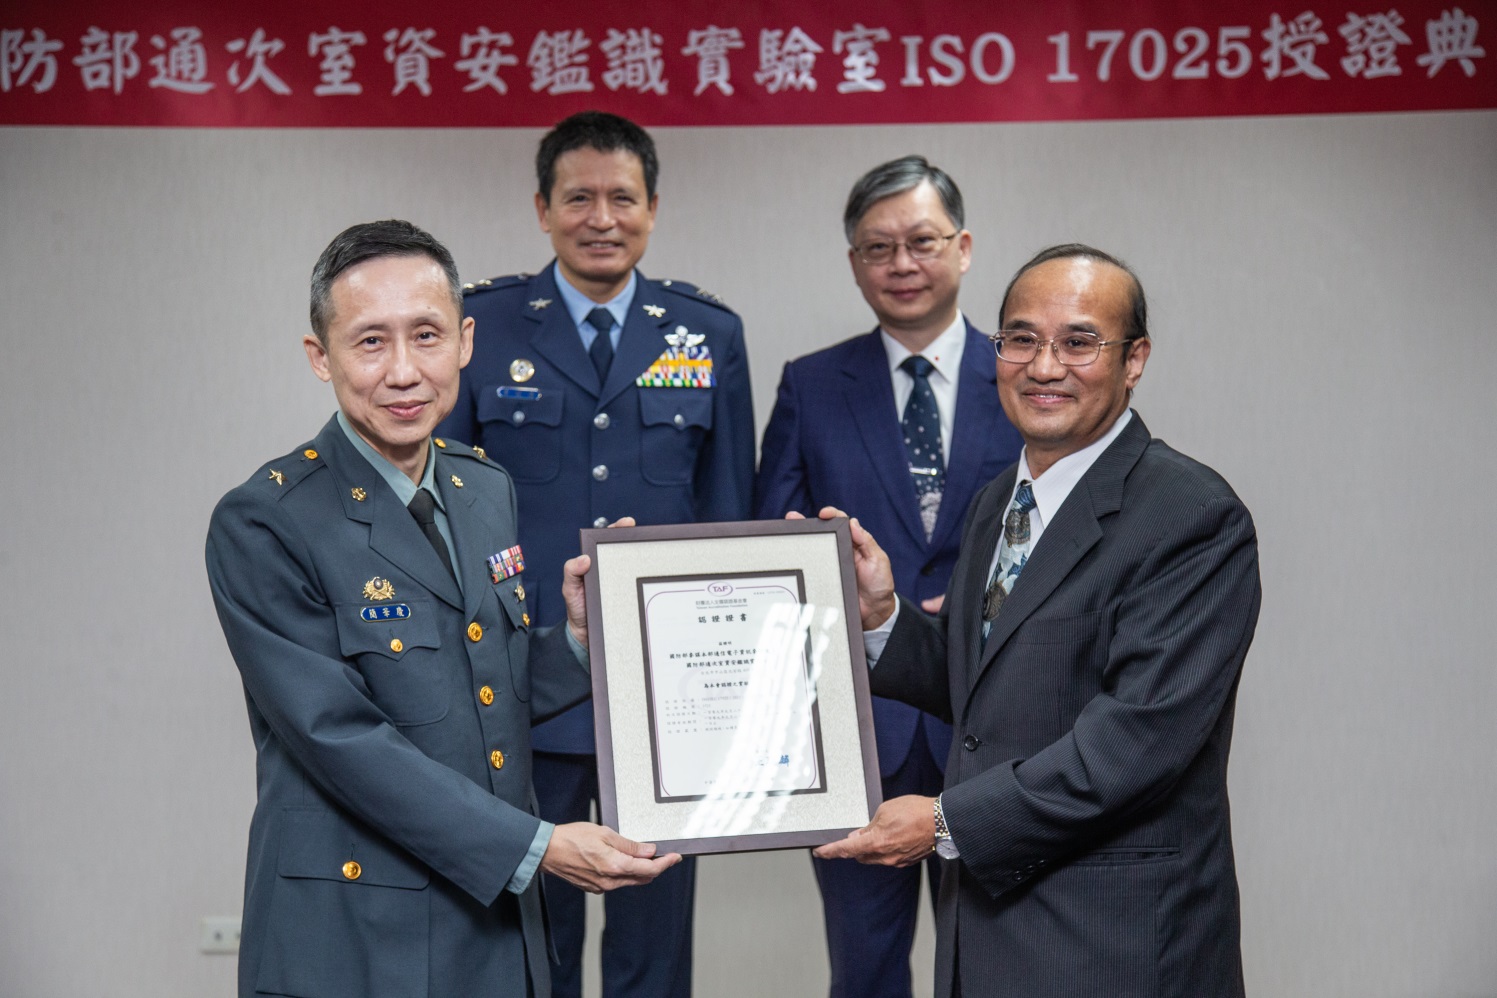 The Office of Assistant Chief of the General Staff for Communications Electronics and Information, Ministry of National Defense receiving “ISO/IEC 17025 International Certification” from President Lien of TAF